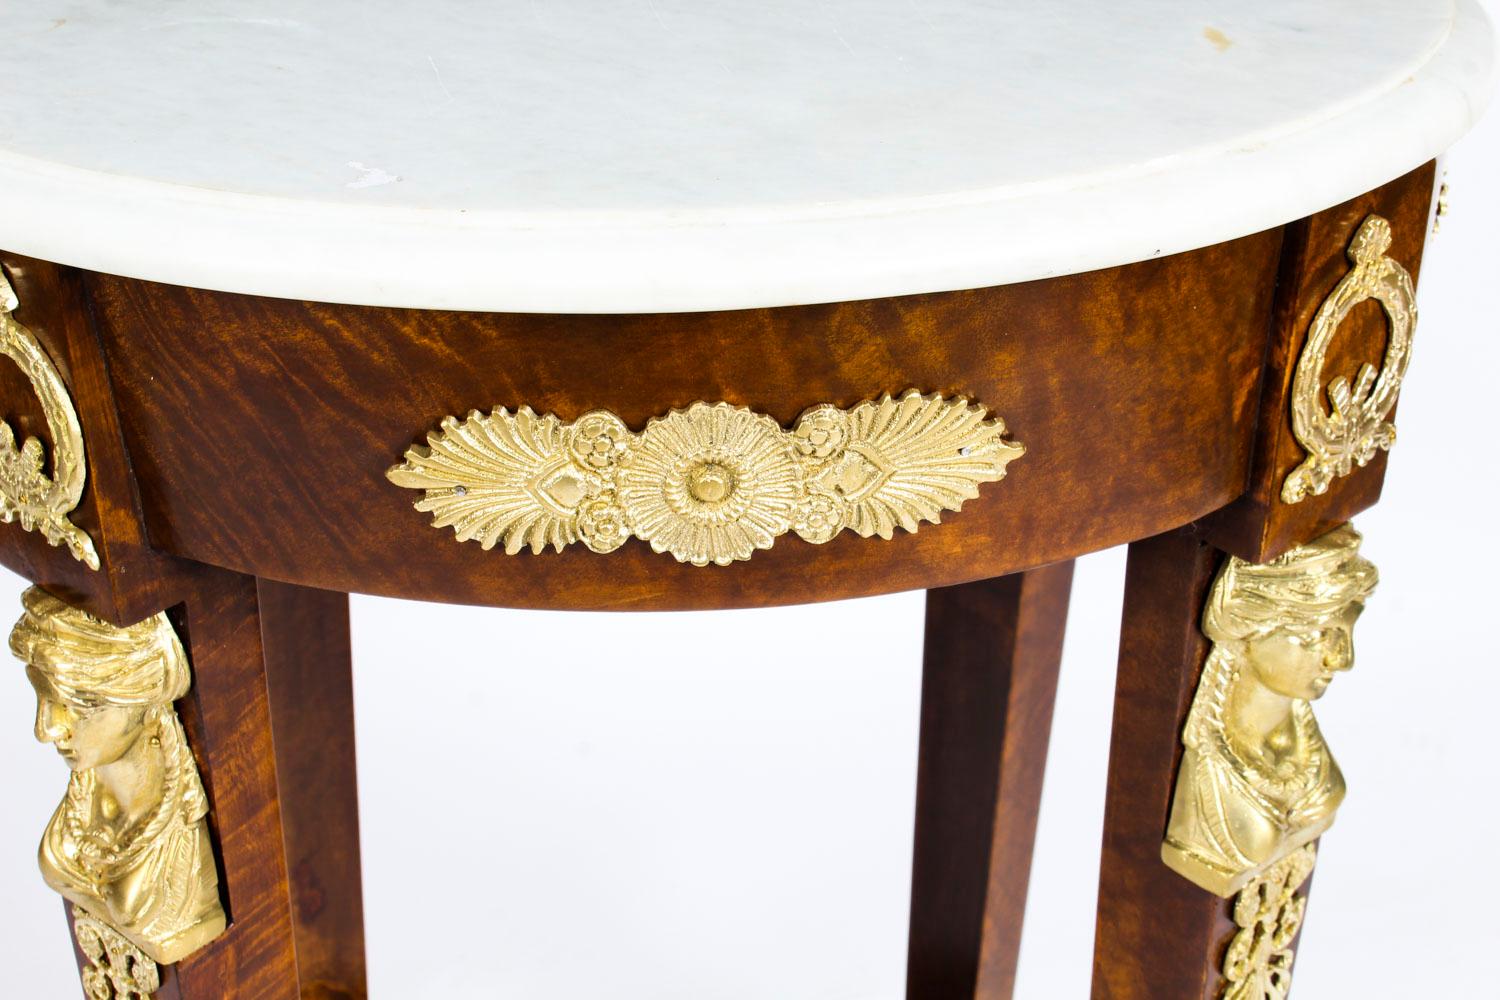 French Empire Revival Ormolu Mounted Guéridon Occasional Table, 19th Century 2